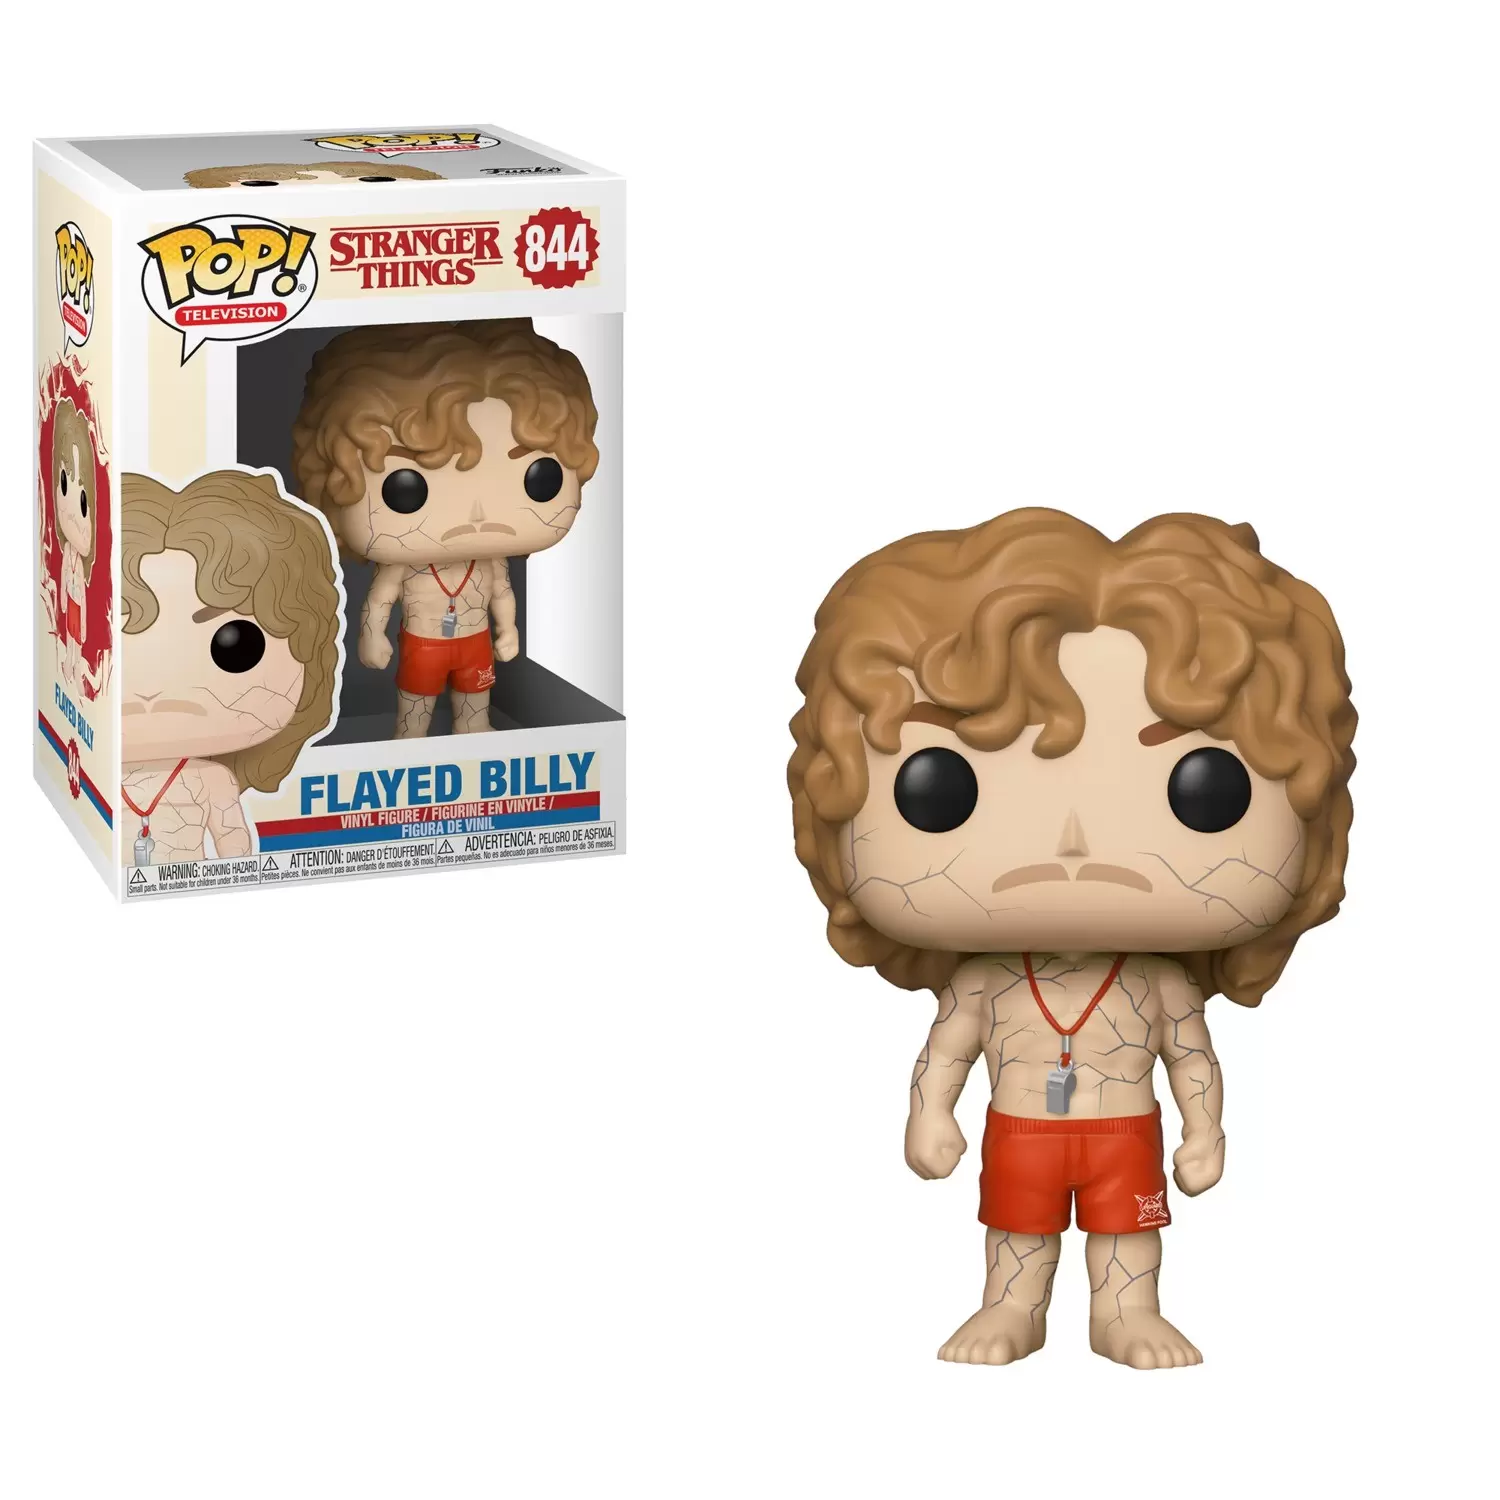 POP! Television - Stranger Things 3 - Flayed Billy